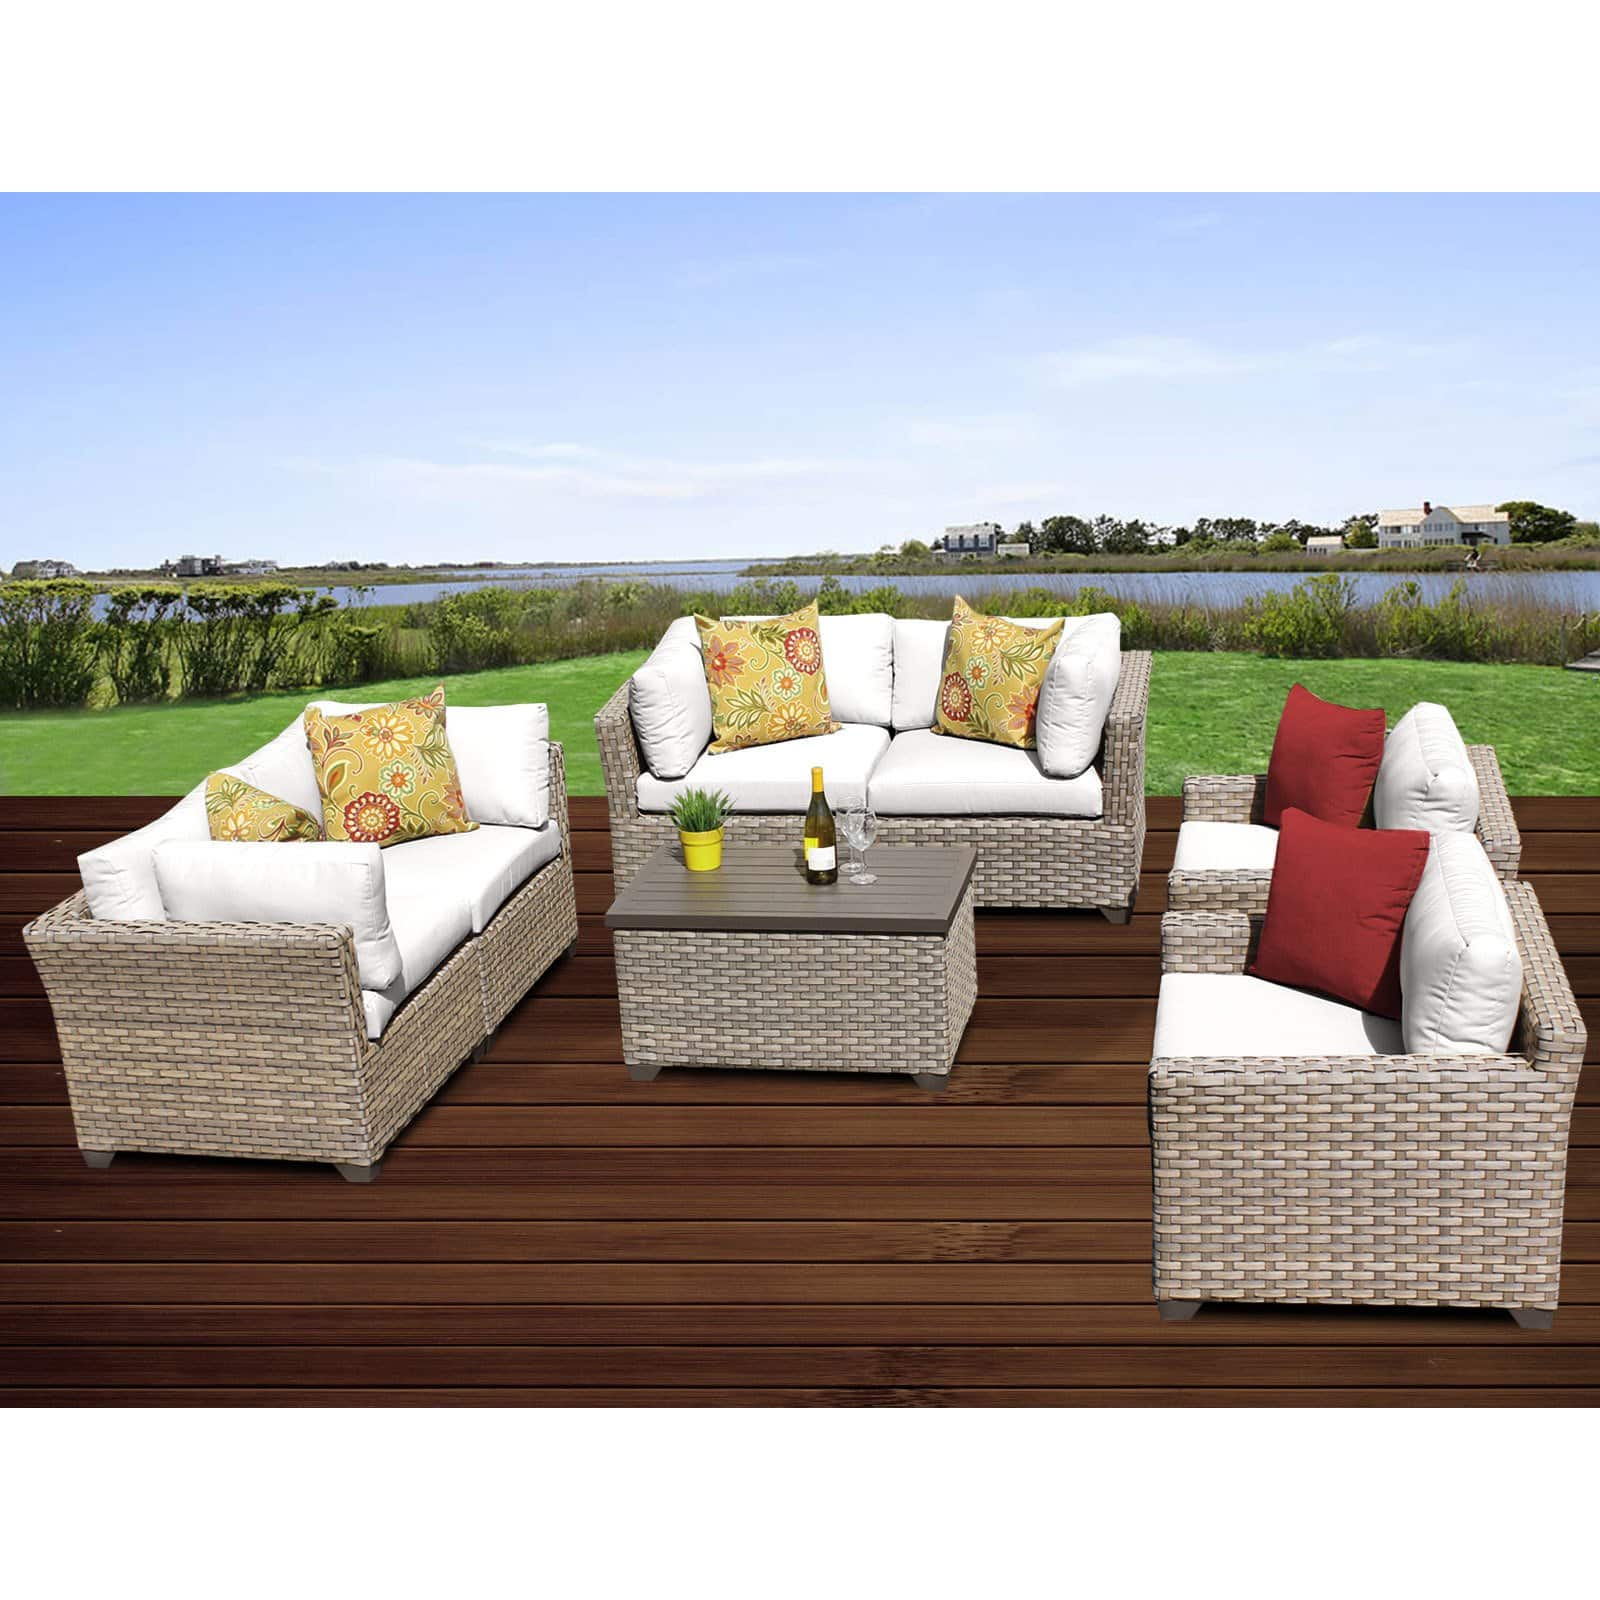 TK Classics Monterey Wicker 7 Piece Patio Conversation Set with Club Chair and 2 Sets of Cushion Covers - image 5 of 5